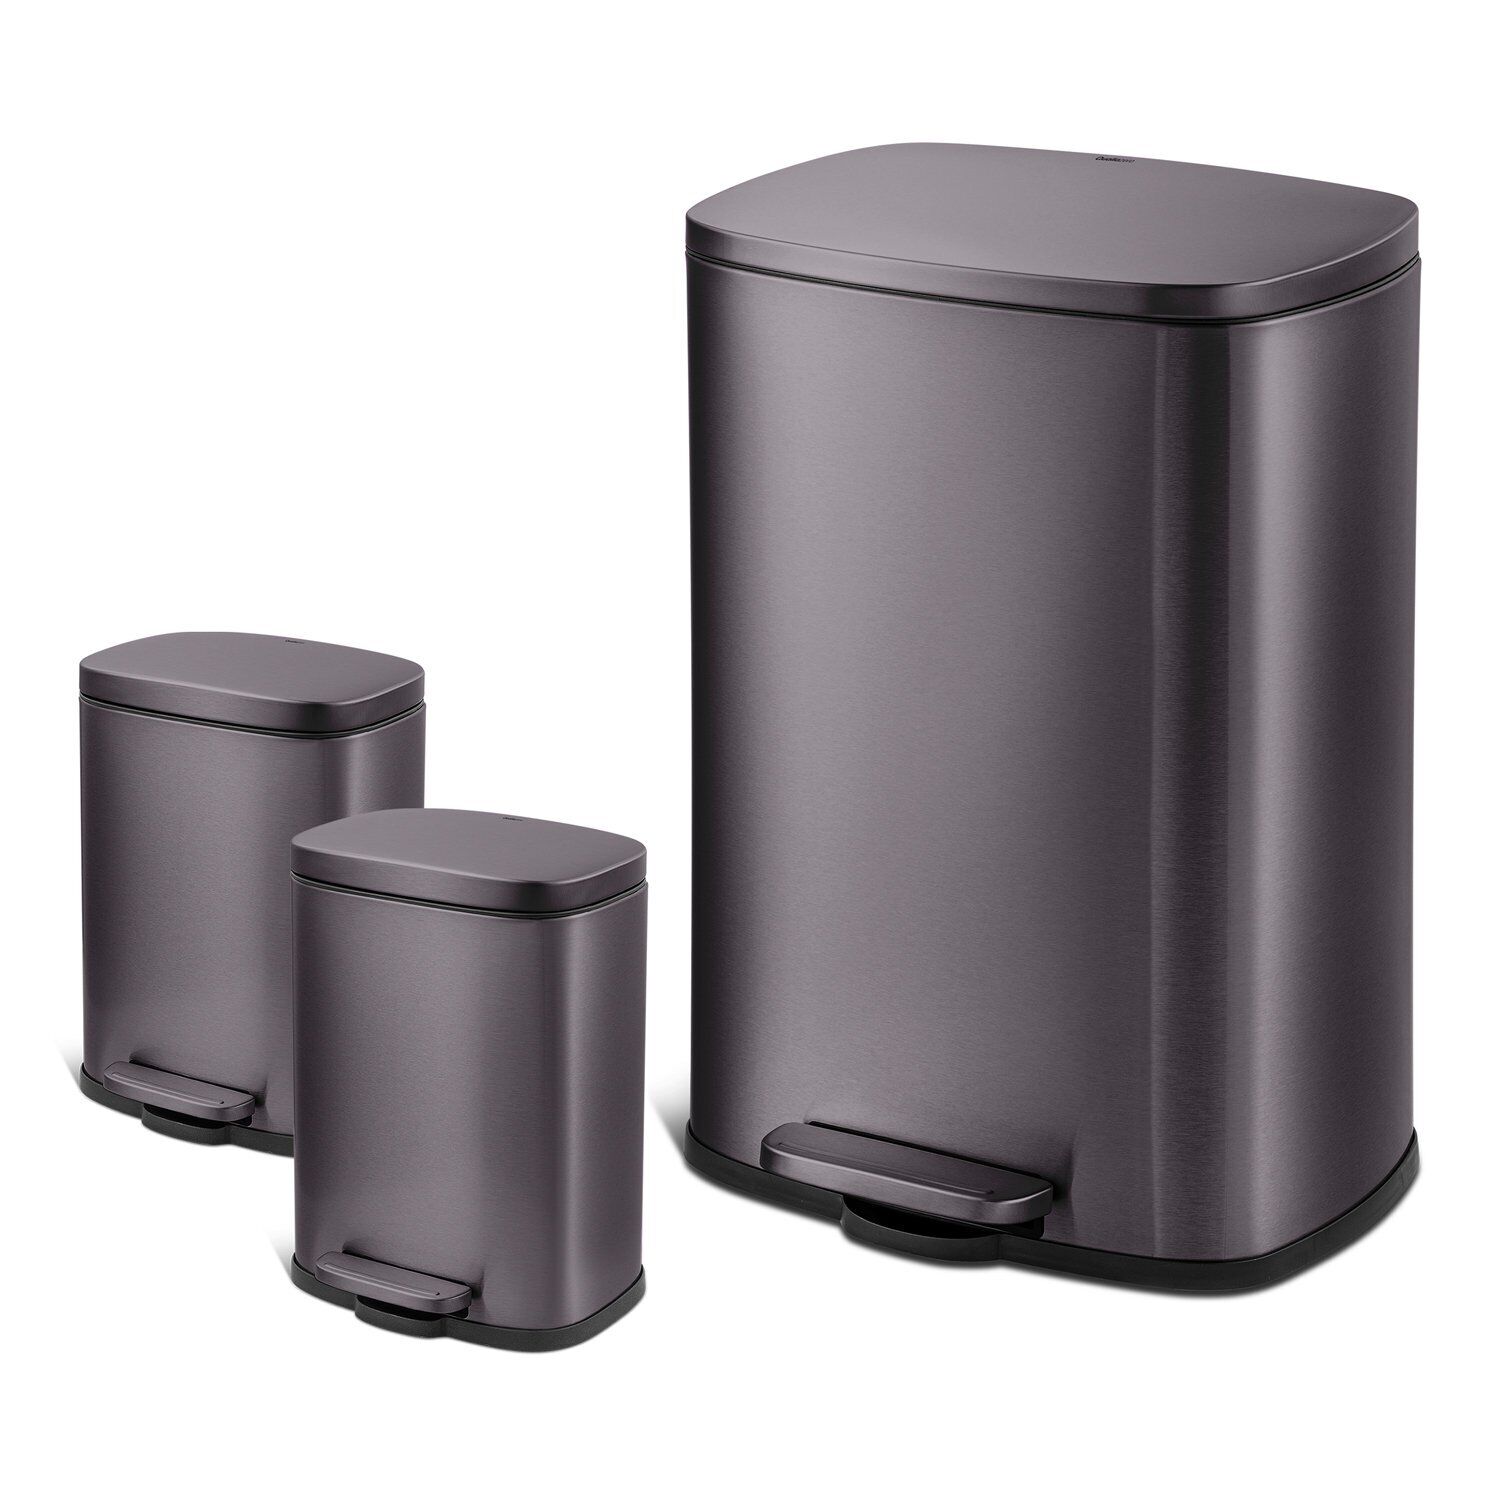 13.2 Gal Rectangular Step Trash Can, Plus Two 1.3 Gal Trash Cans, Black Stainles